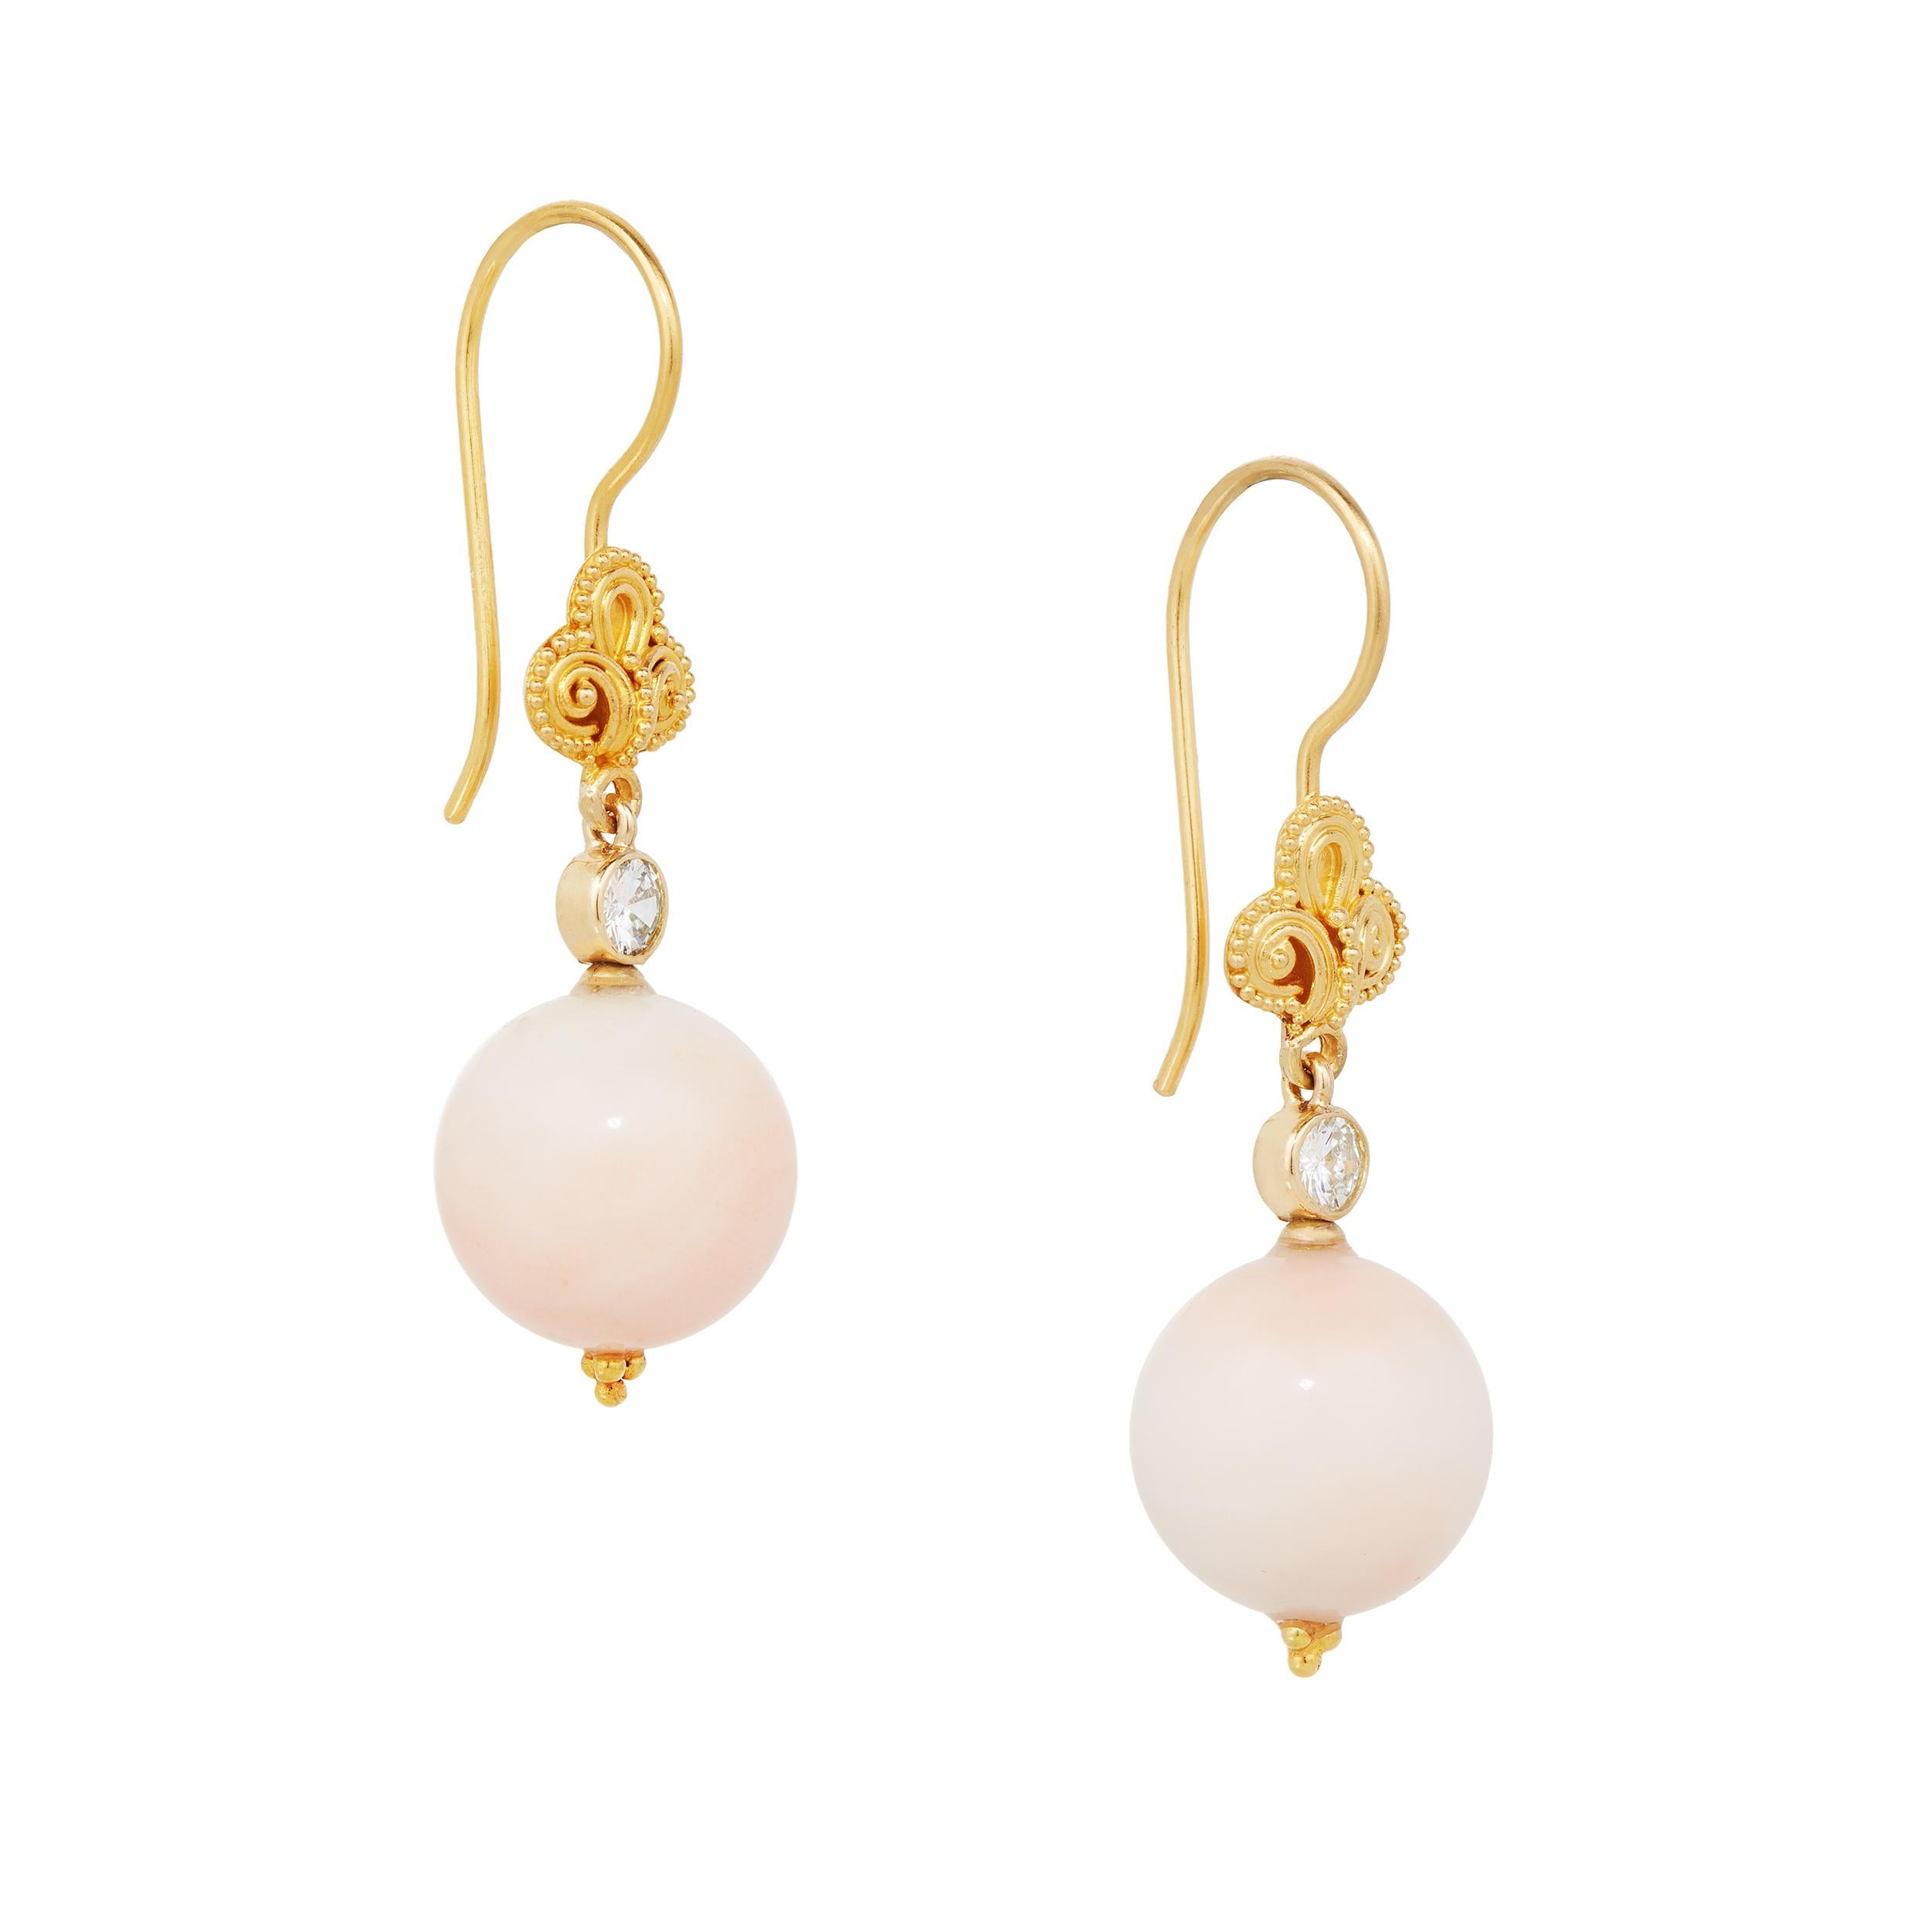 Stunning earrings that were created to feature matched 11.38 mm Vintage Angel Skin Coral.  They are topped with 0.34 Carats of Diamond.  The brushed 18 Karat Yellow Gold with the hand beading gives these earrings an extra luxurious look. 